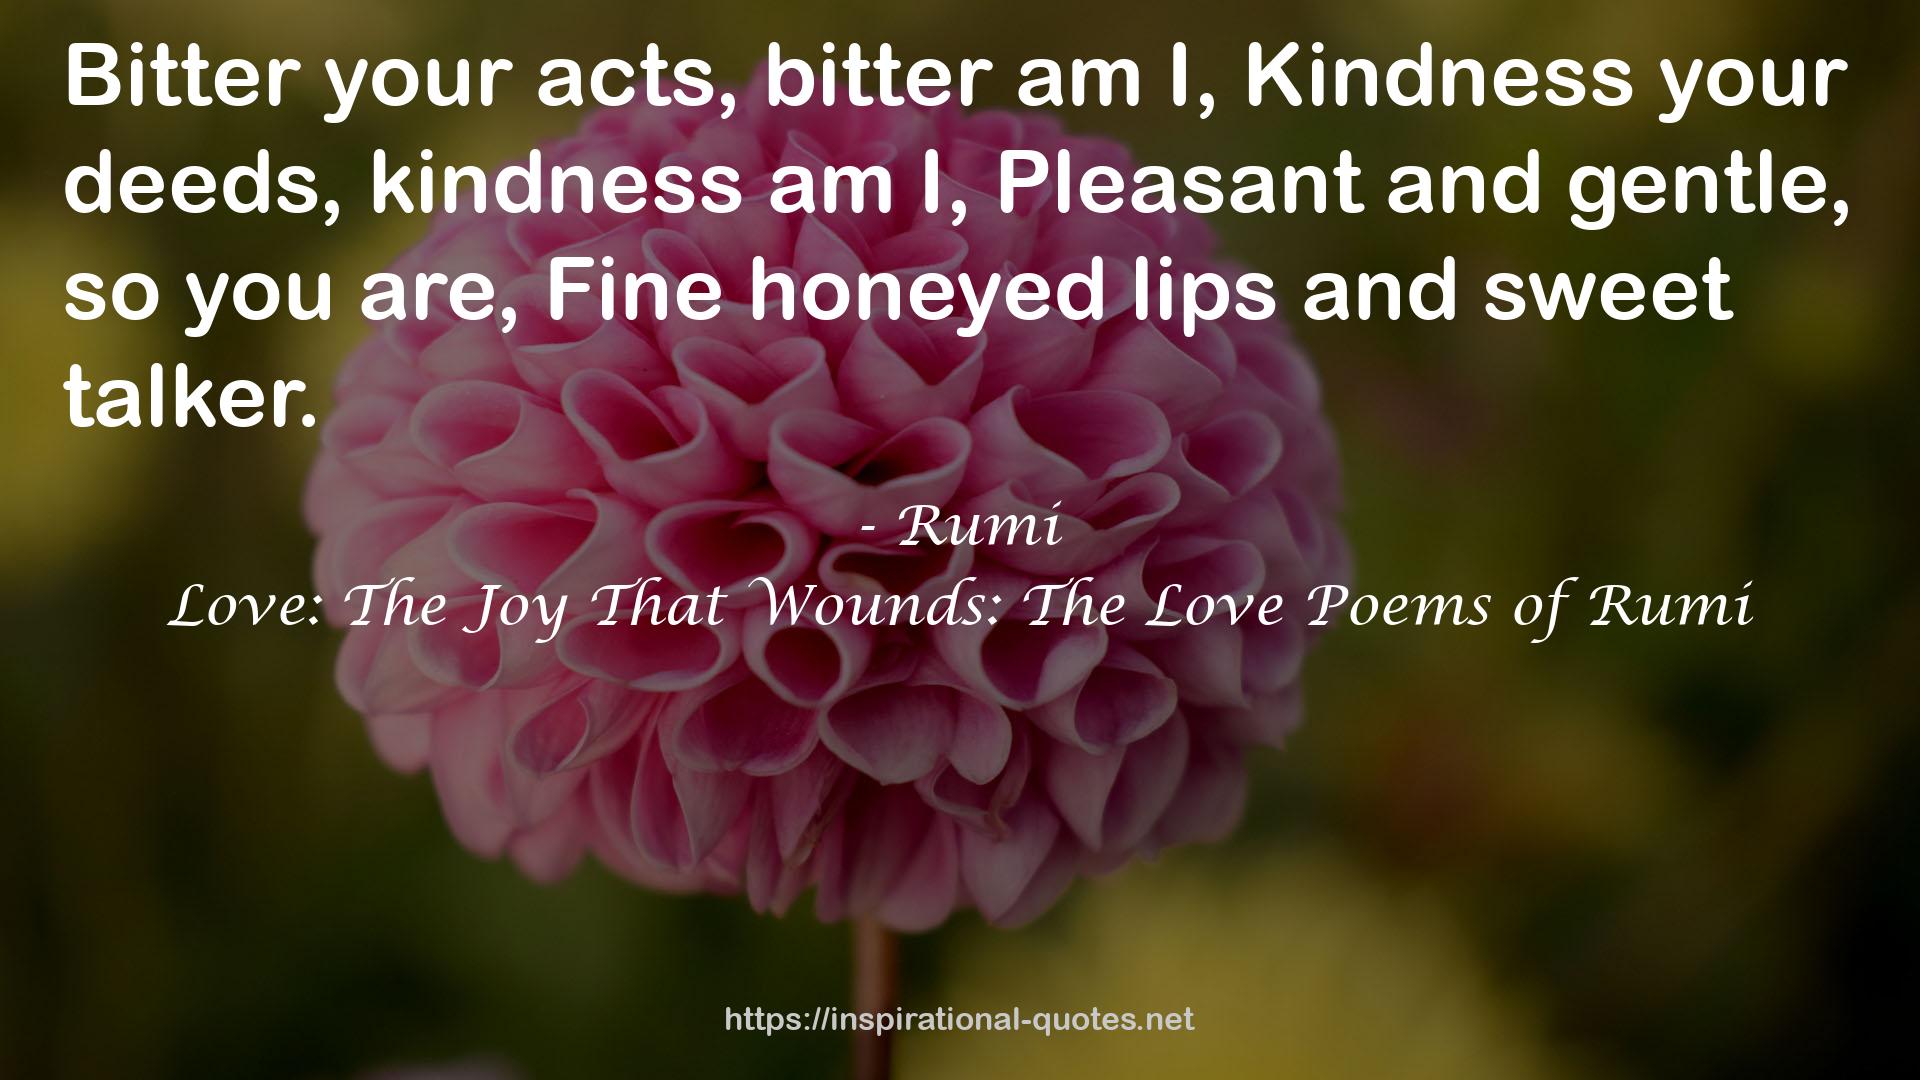 Love: The Joy That Wounds: The Love Poems of Rumi QUOTES